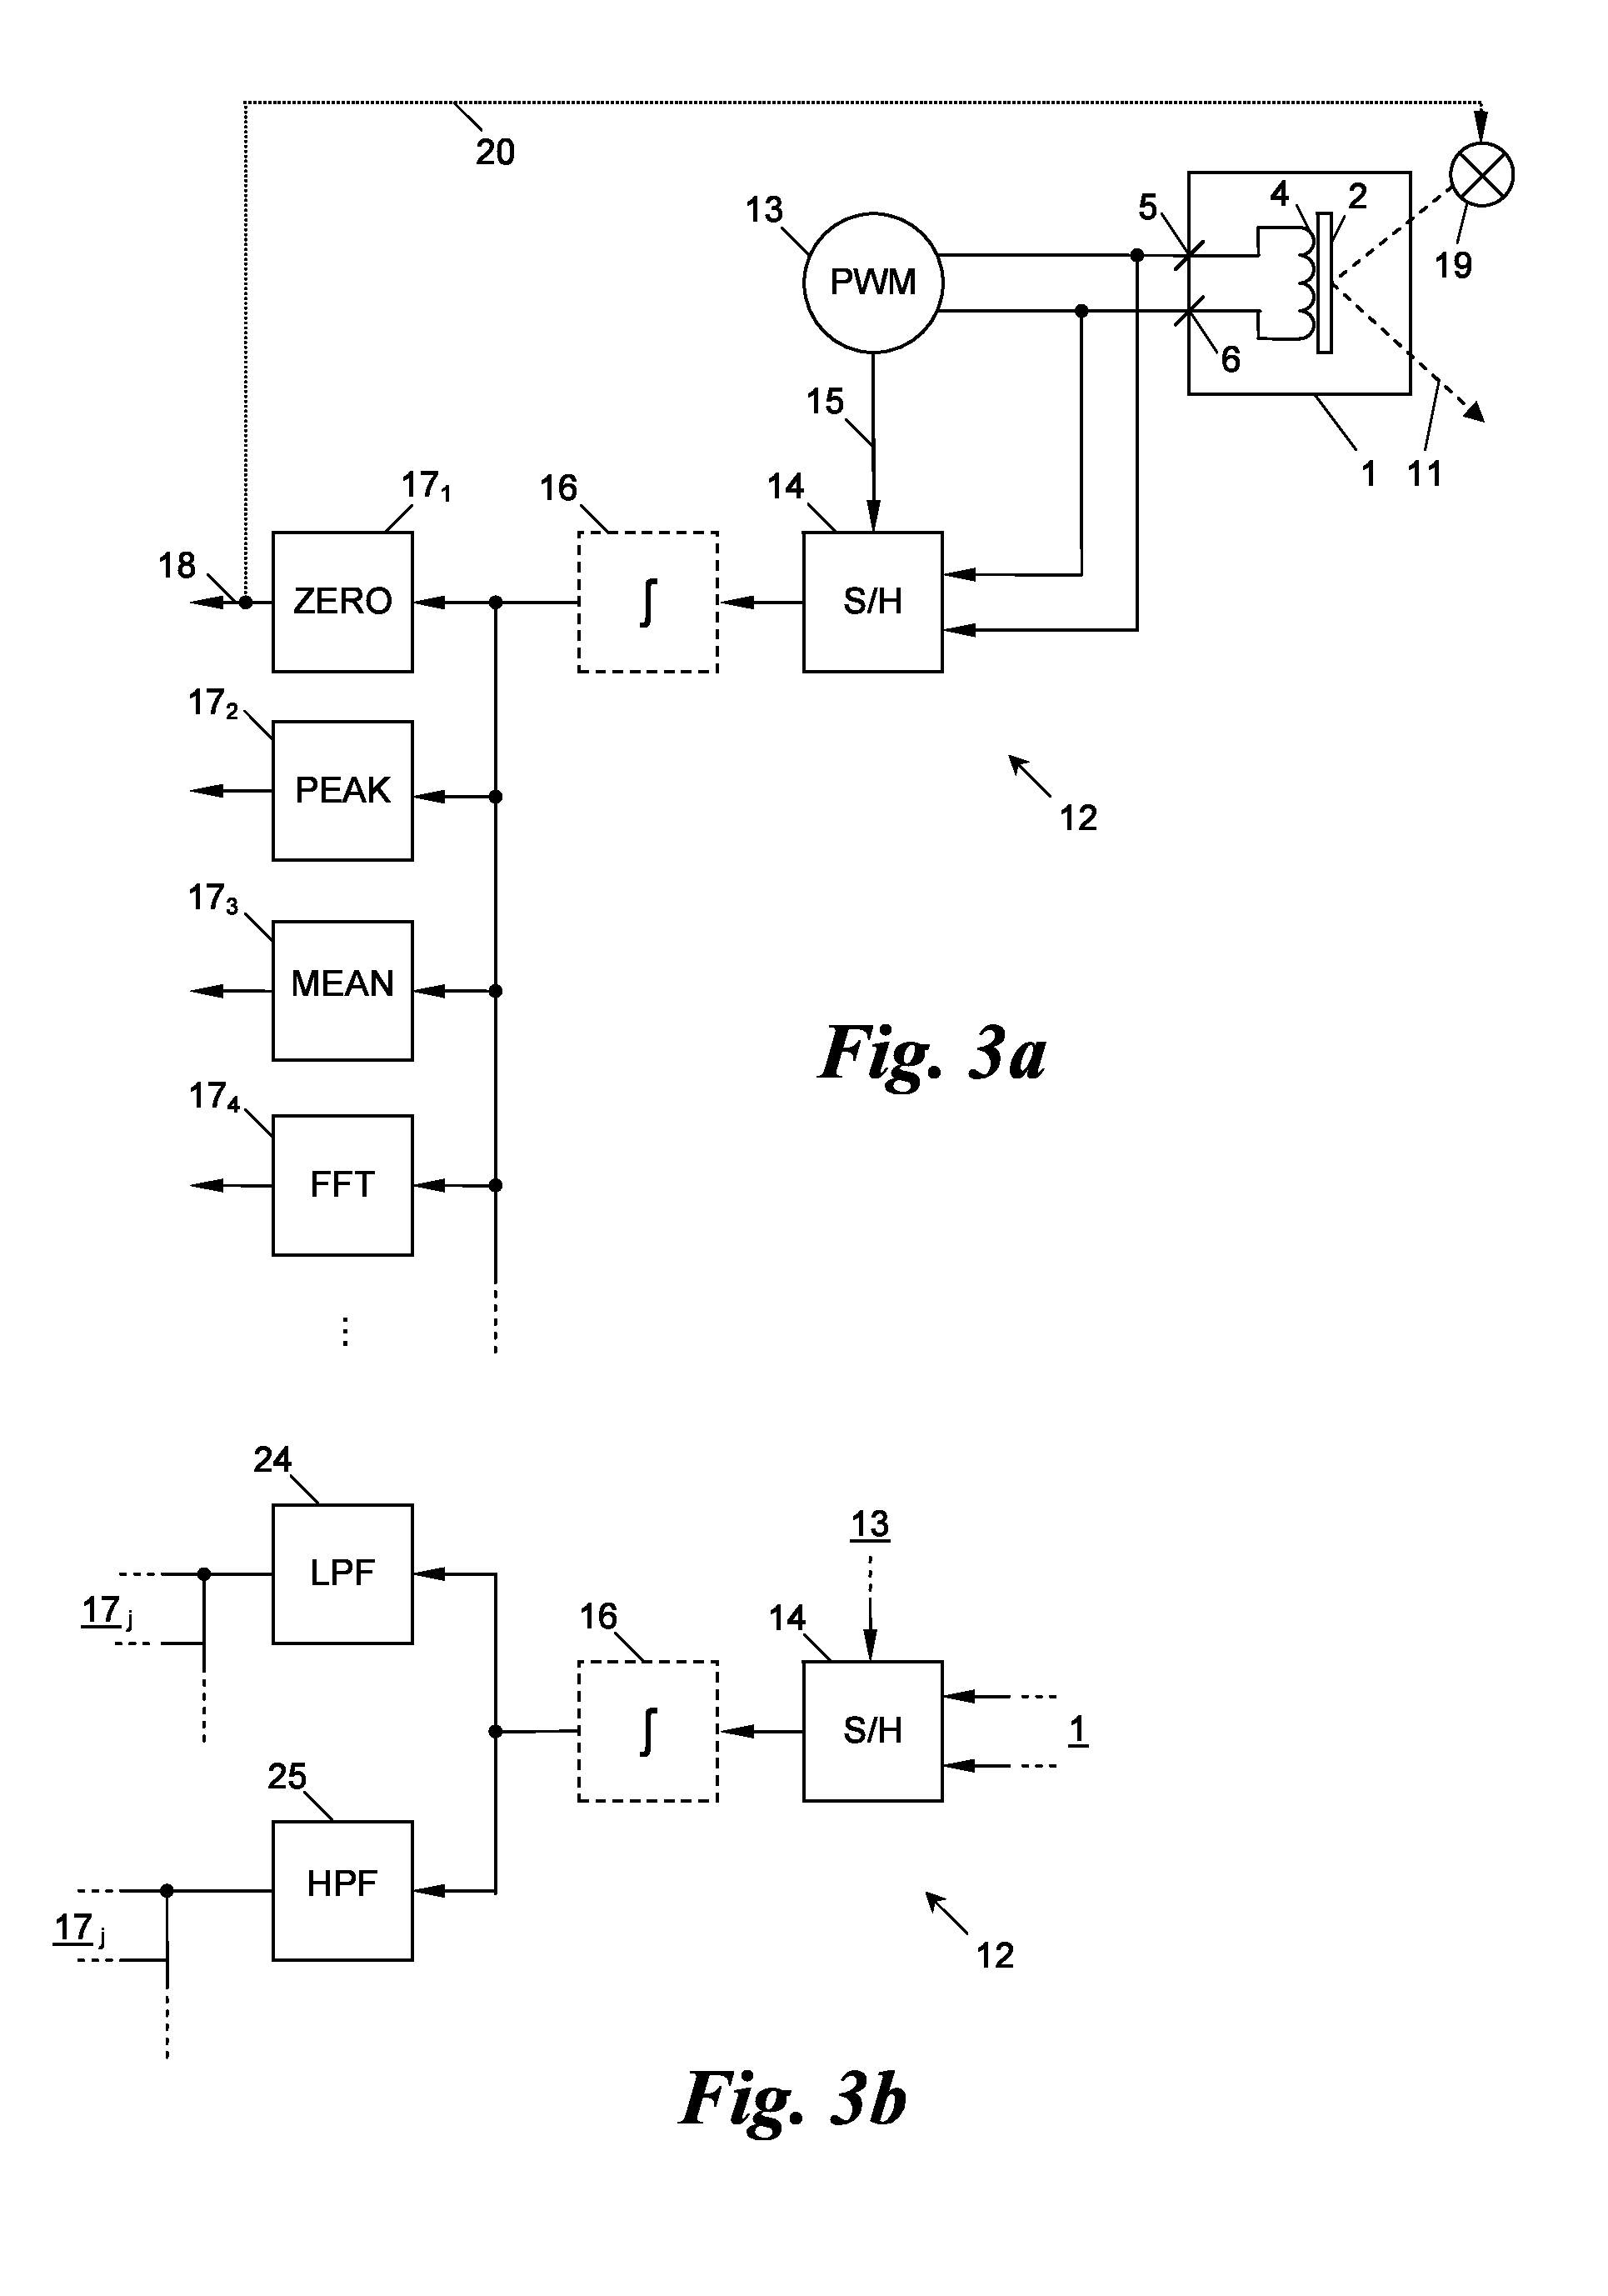 Apparatus and Method for Driving and Measuring a MEMS Mirror System